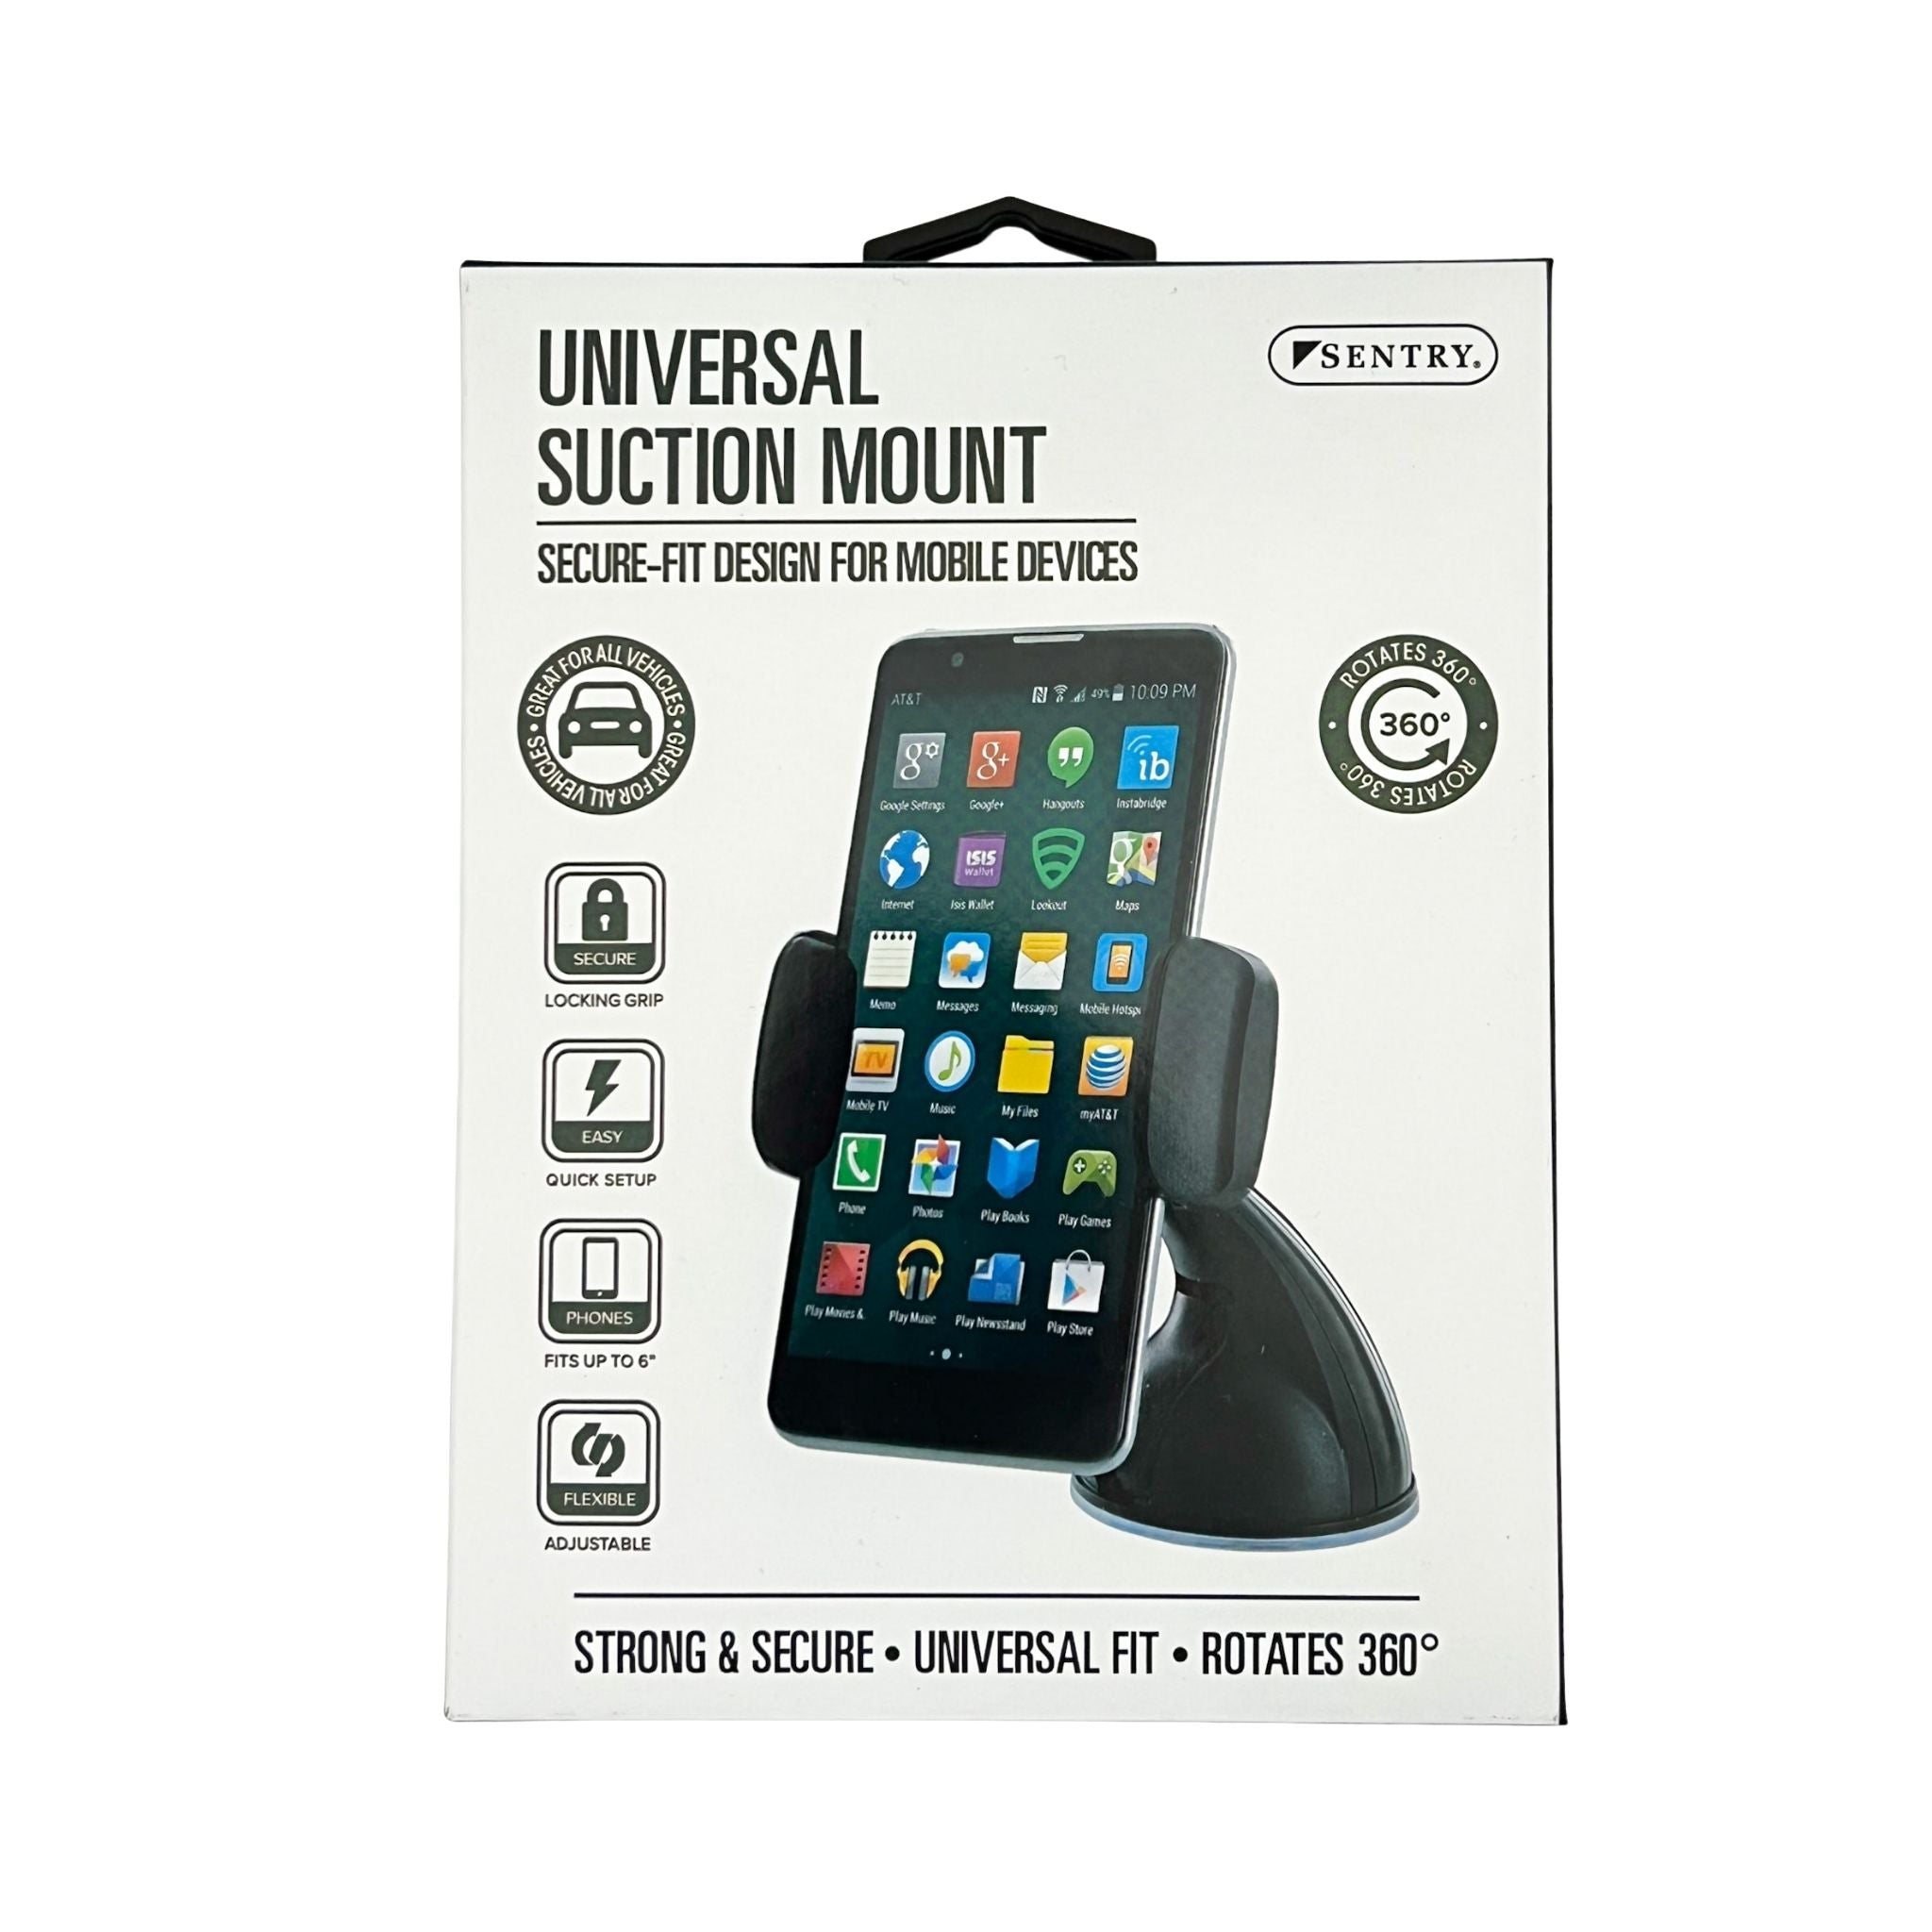 Universal Suction Cup Mount